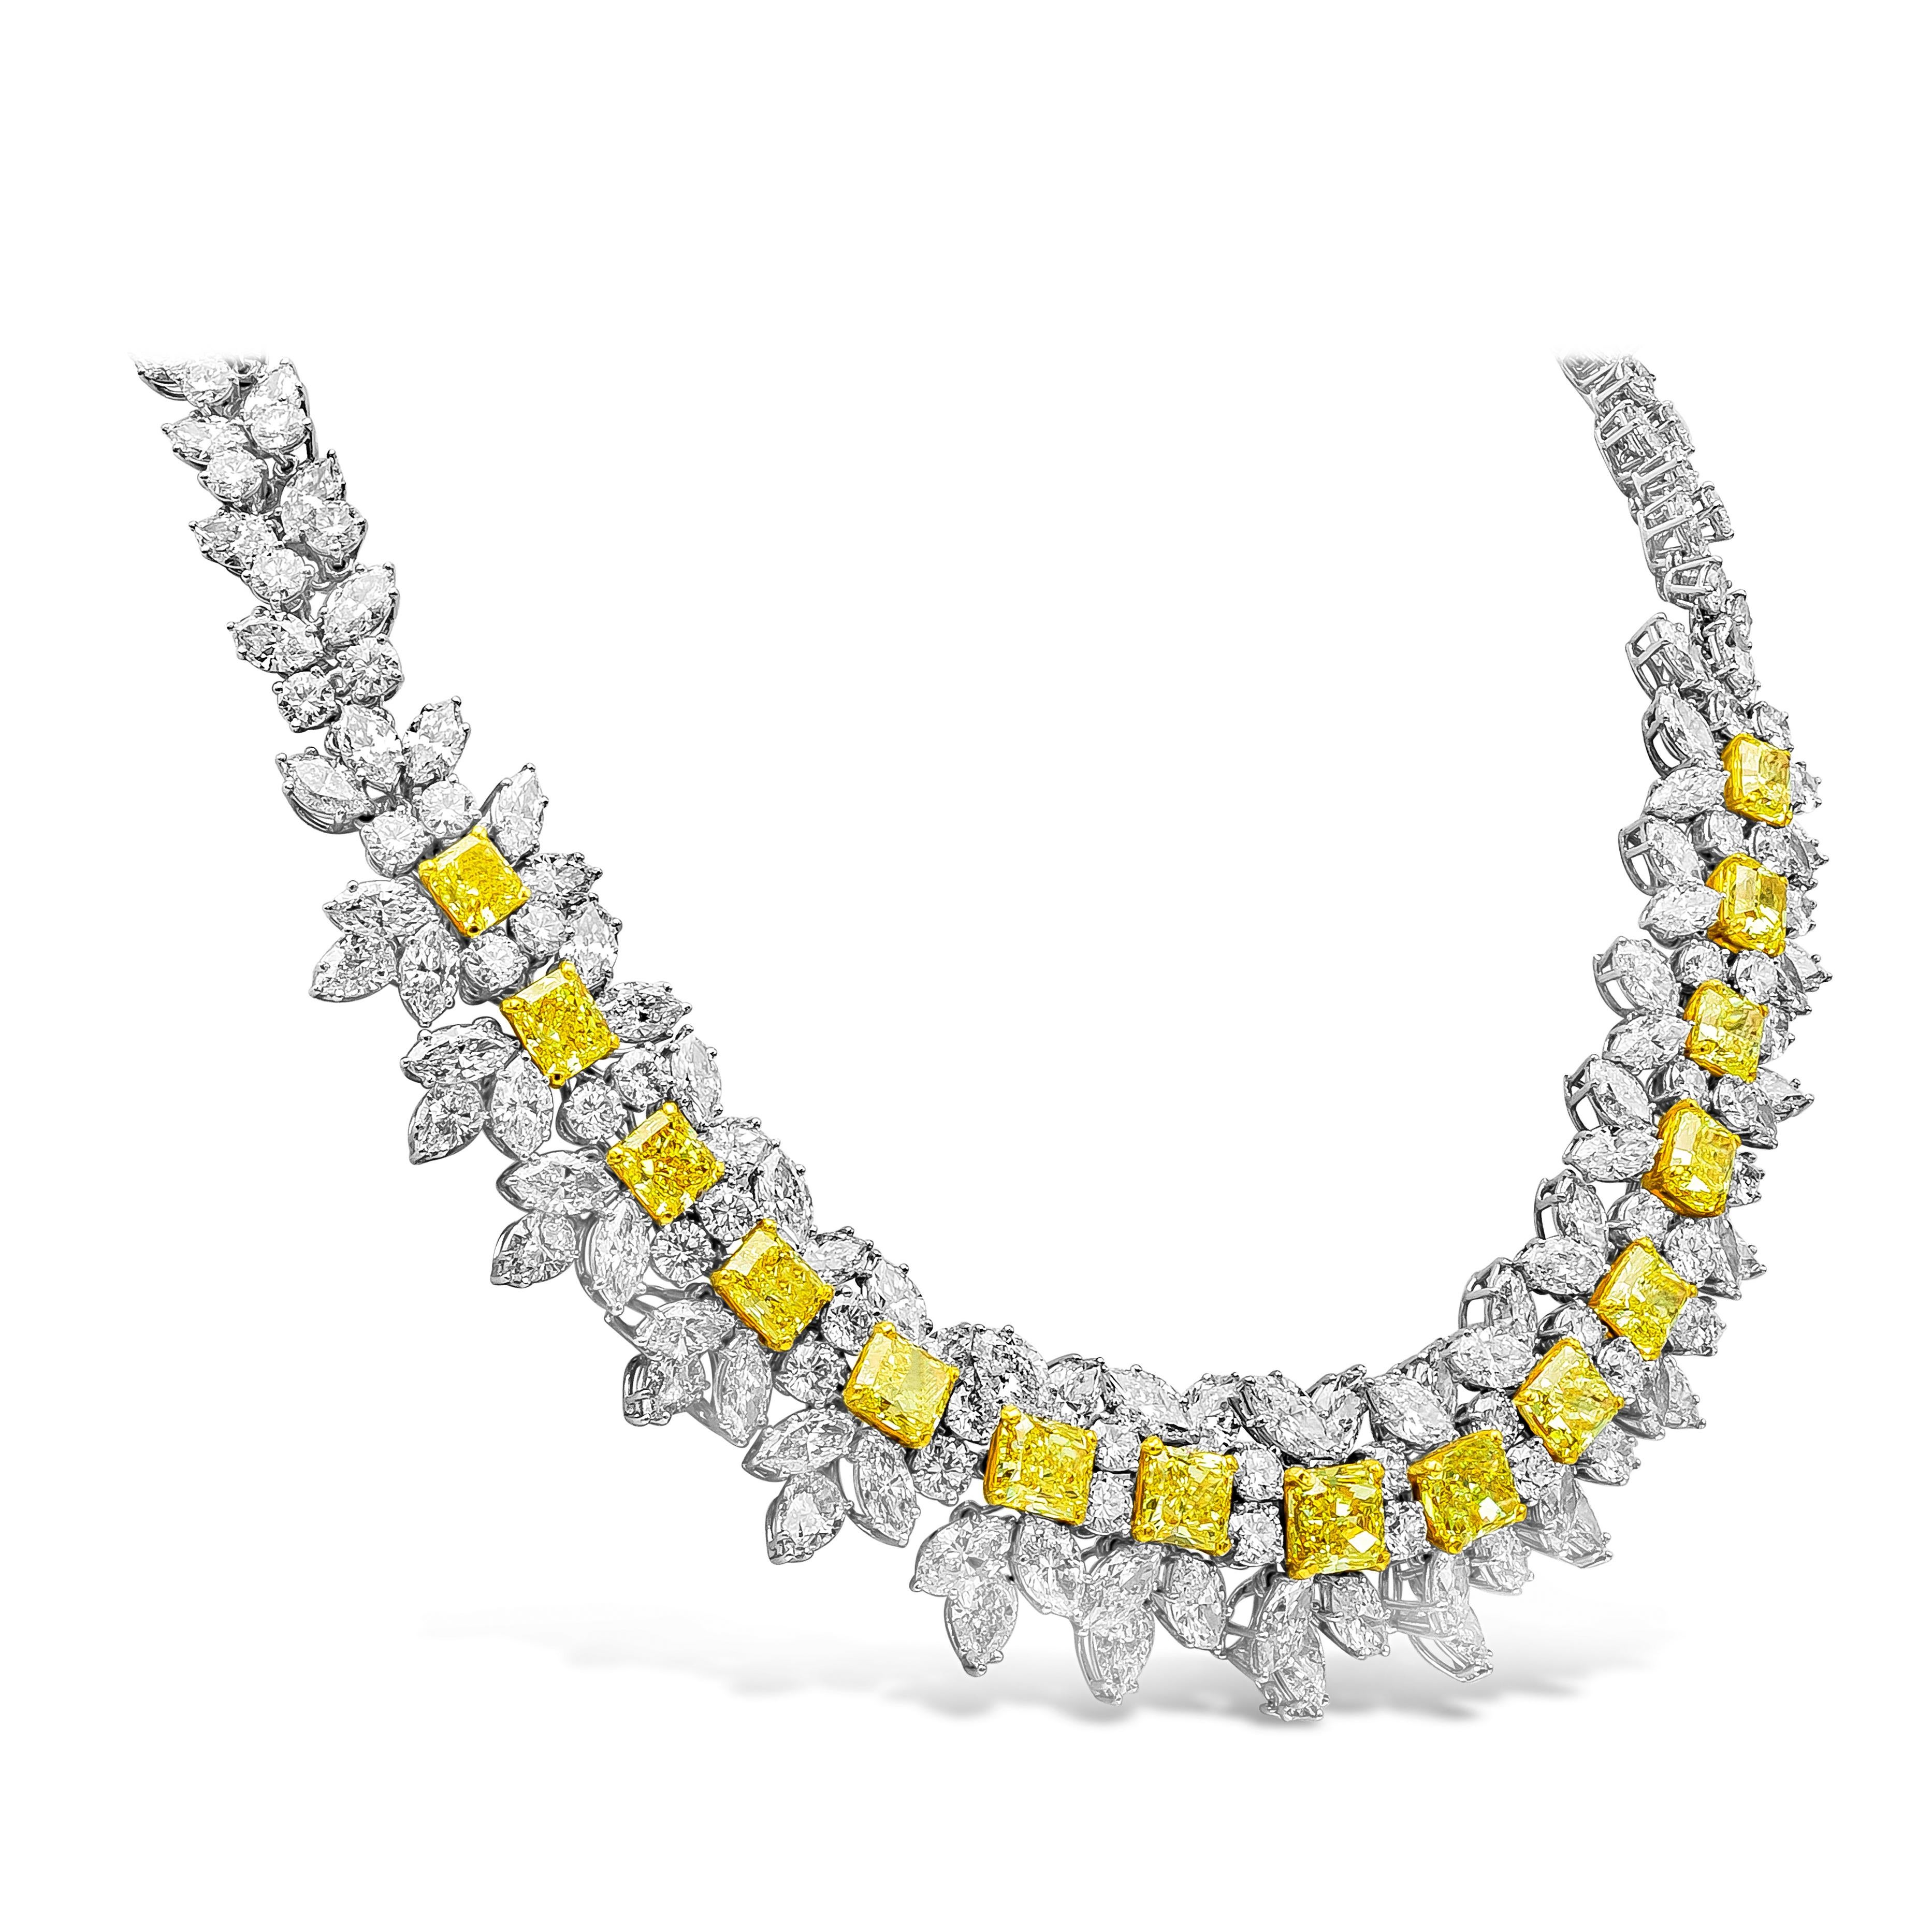 An important and very rare diamond necklace showcasing a row of graduating radiant cut fancy intense yellow diamonds, surrounded by brilliant white diamonds in an intricate and creative design. Yellow diamonds weigh 23.45 carats total, white